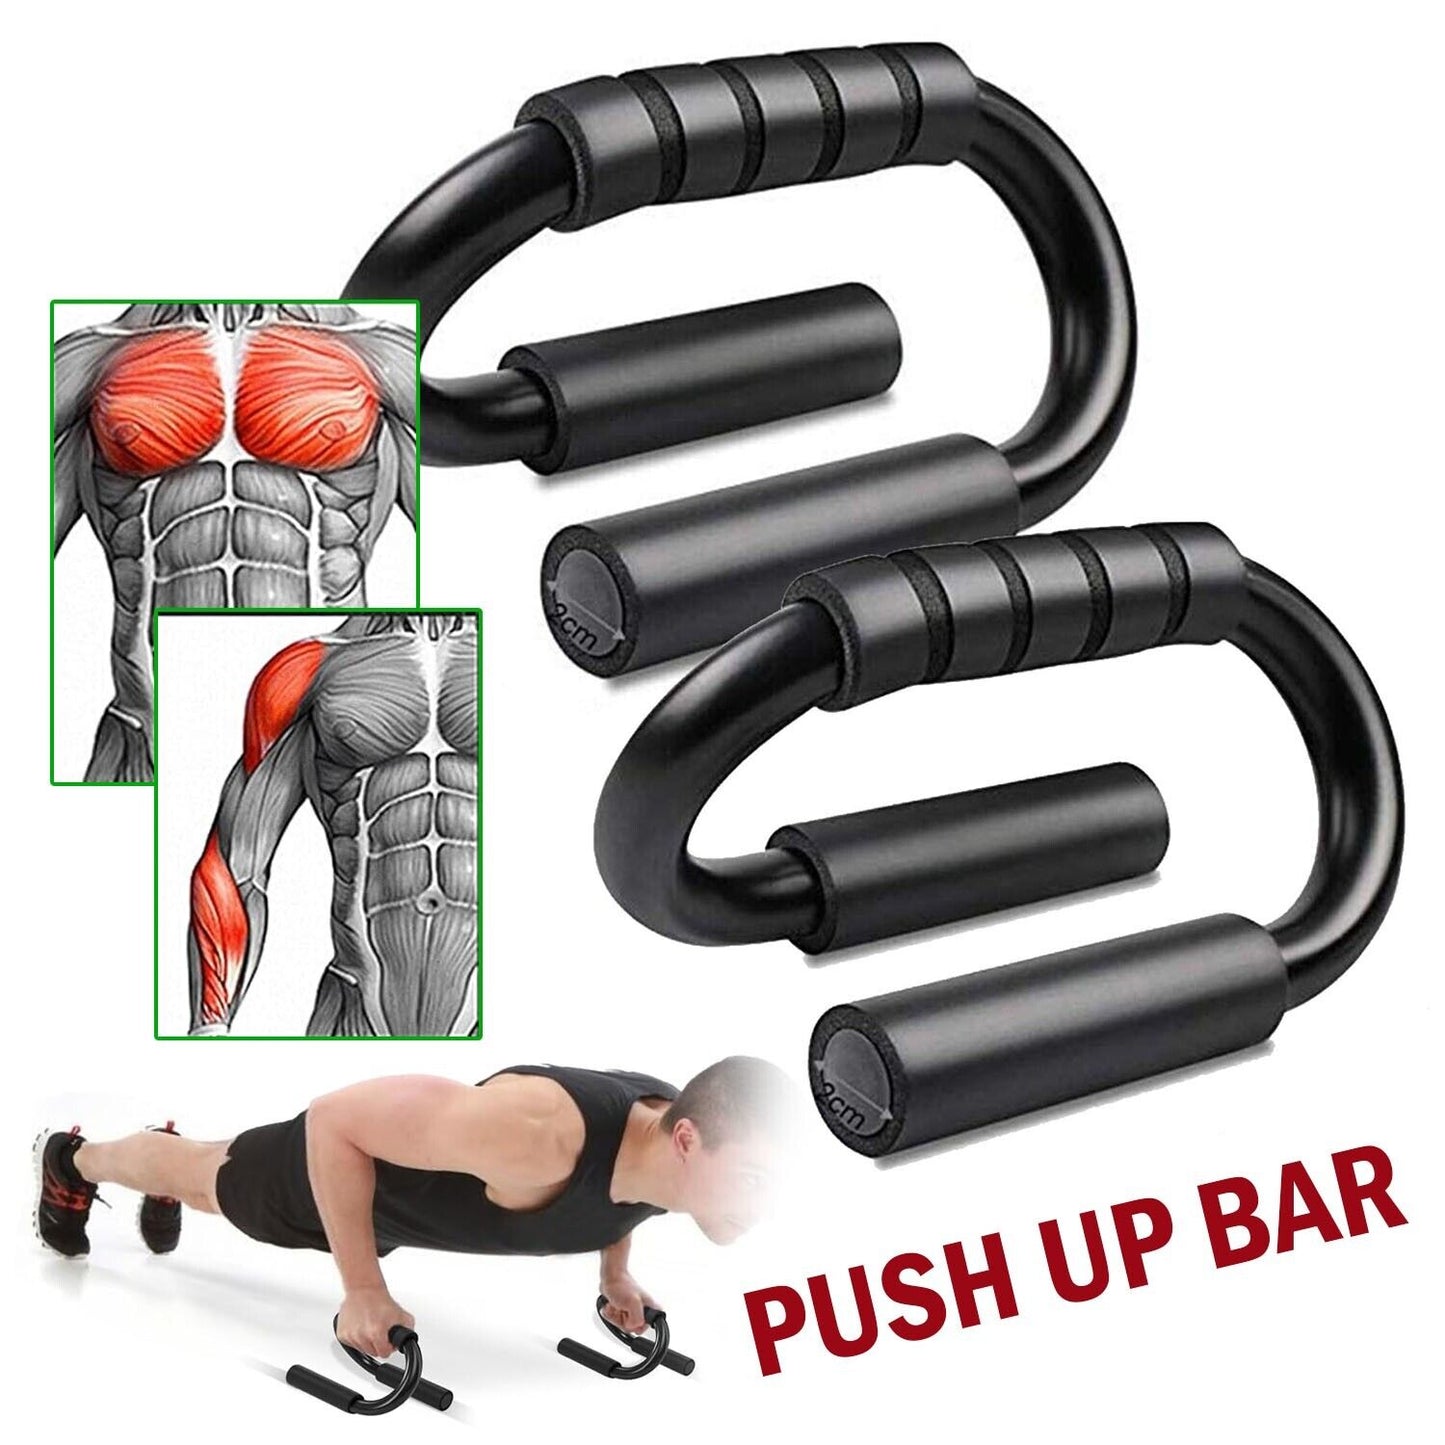 Body Sculptured Push Up Bars Press Handles Stands Exercise Grips FITNESS WORKOUT